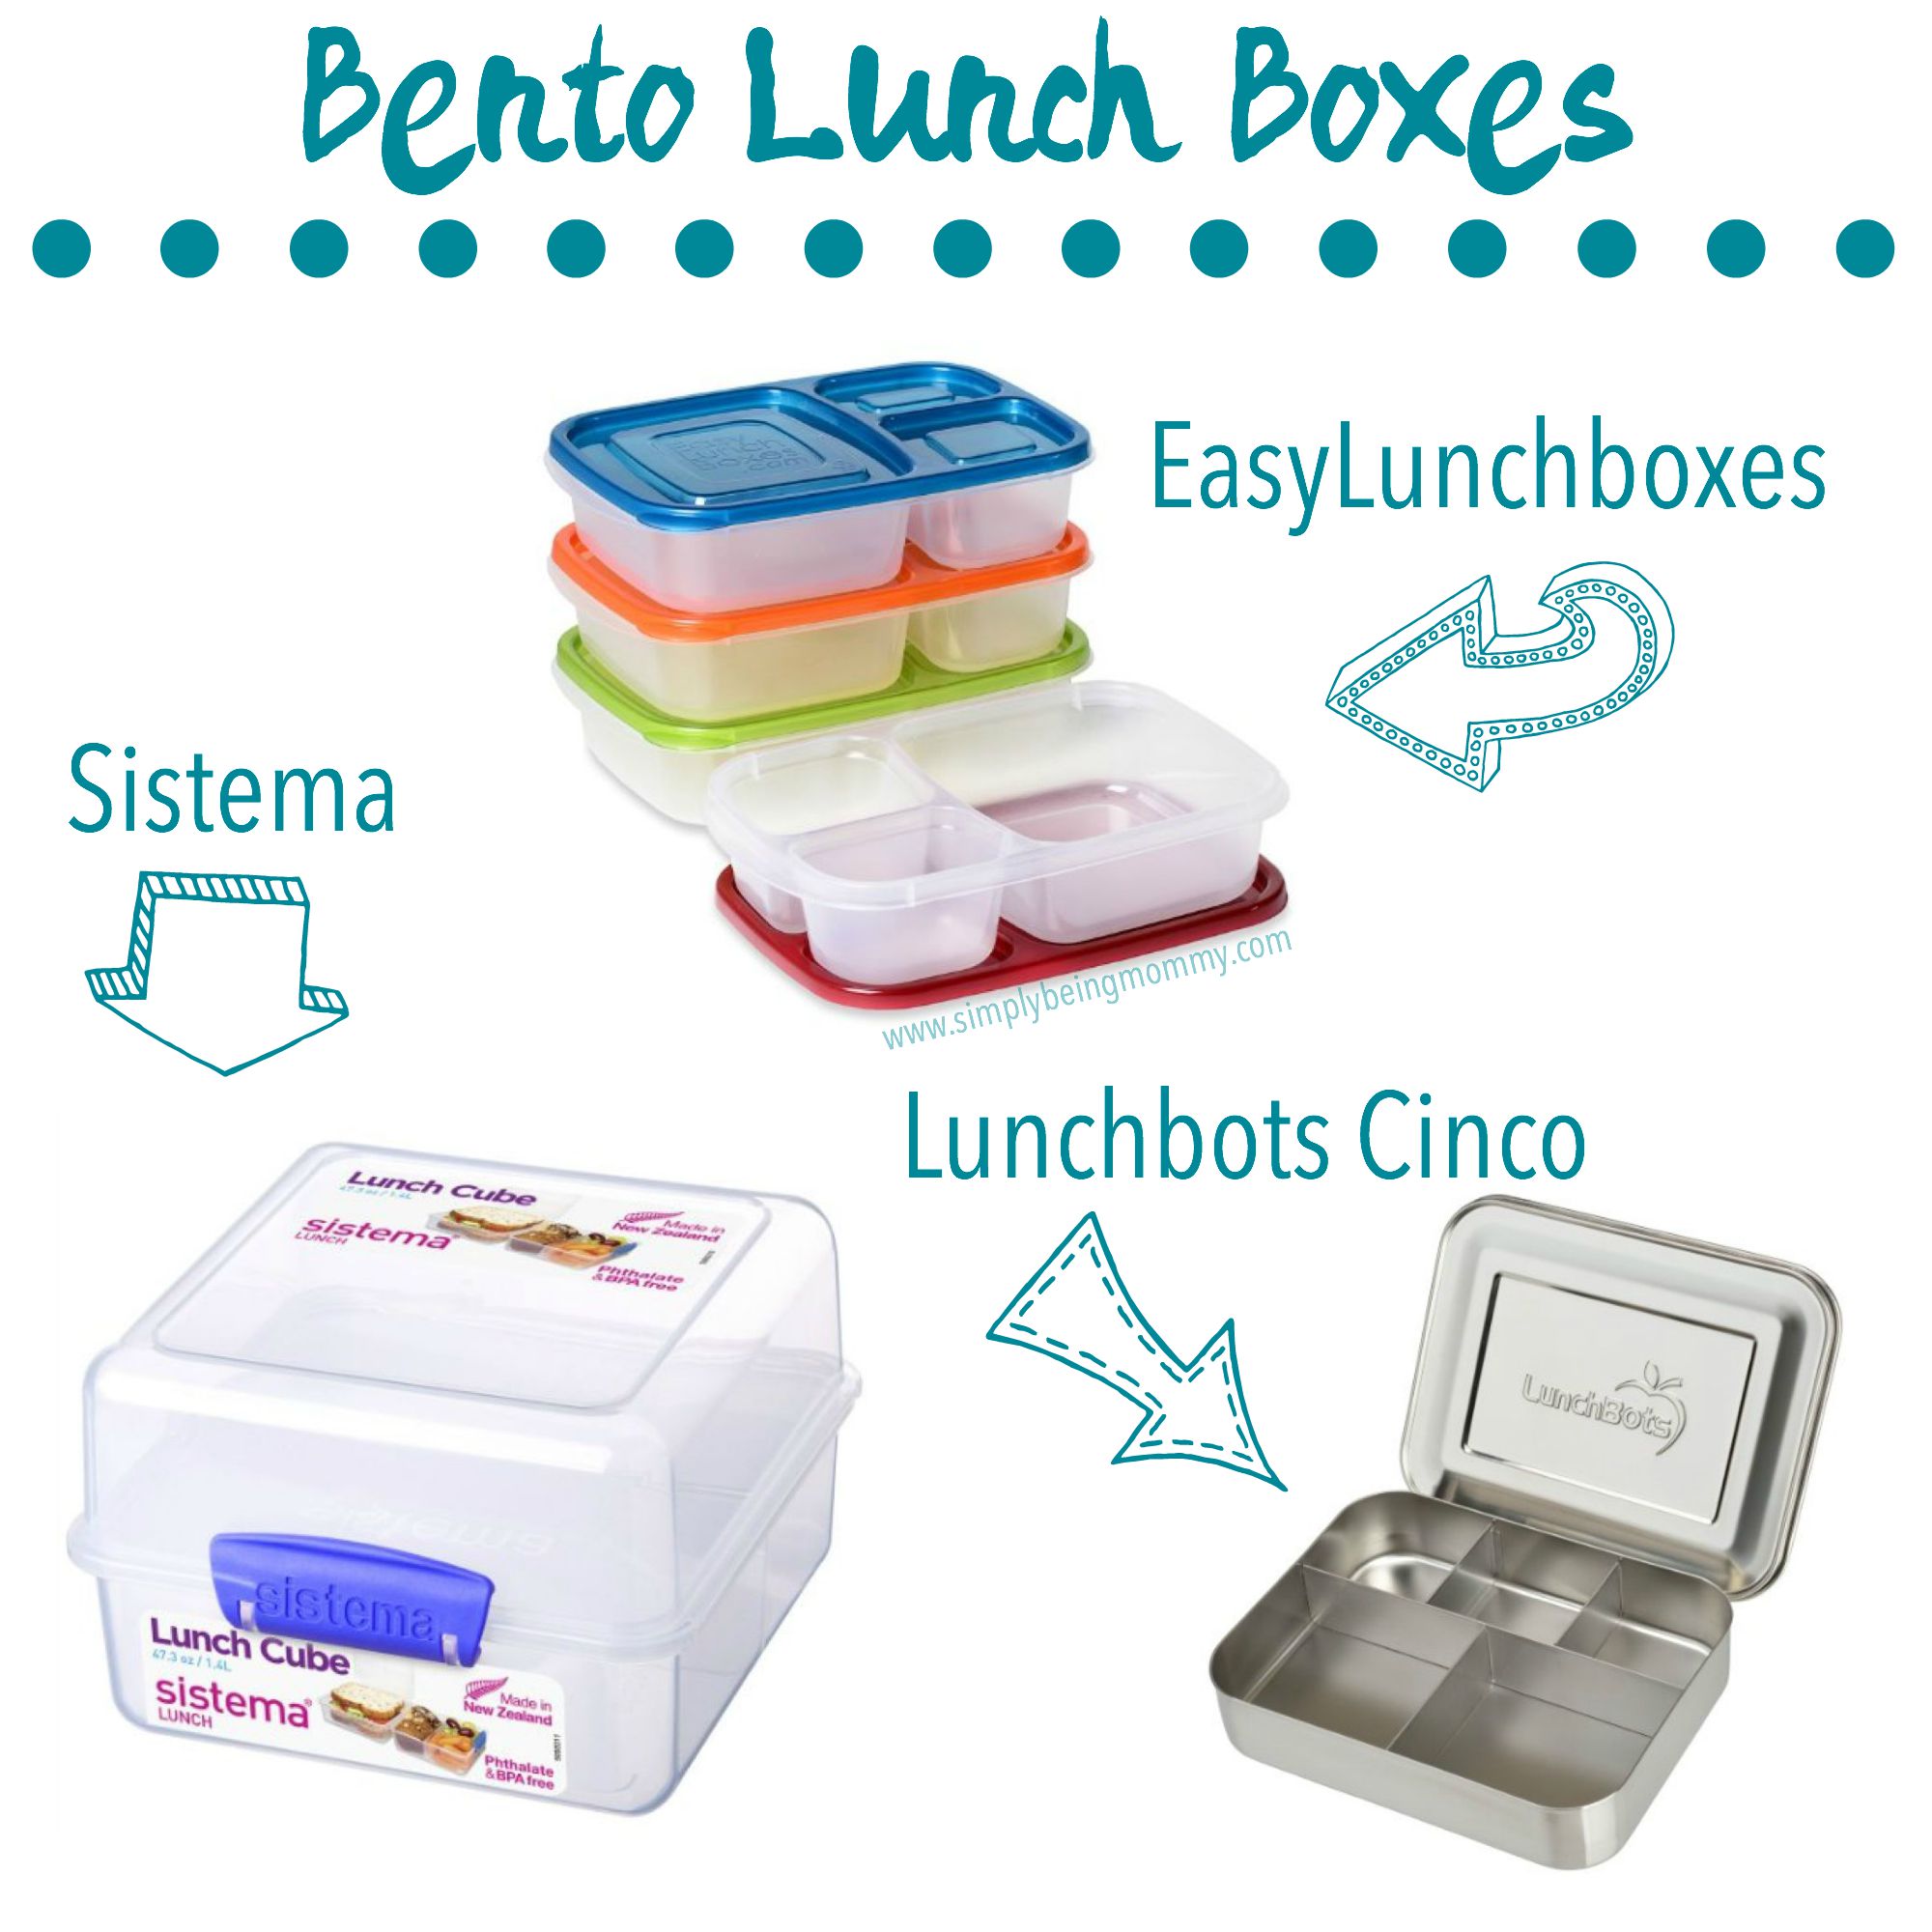 Looking to make bento lunches for your children? I'll tell you what you need to begin making fun, healthy lunches for your children. See my full list of bento lunch supplies that make it easier.